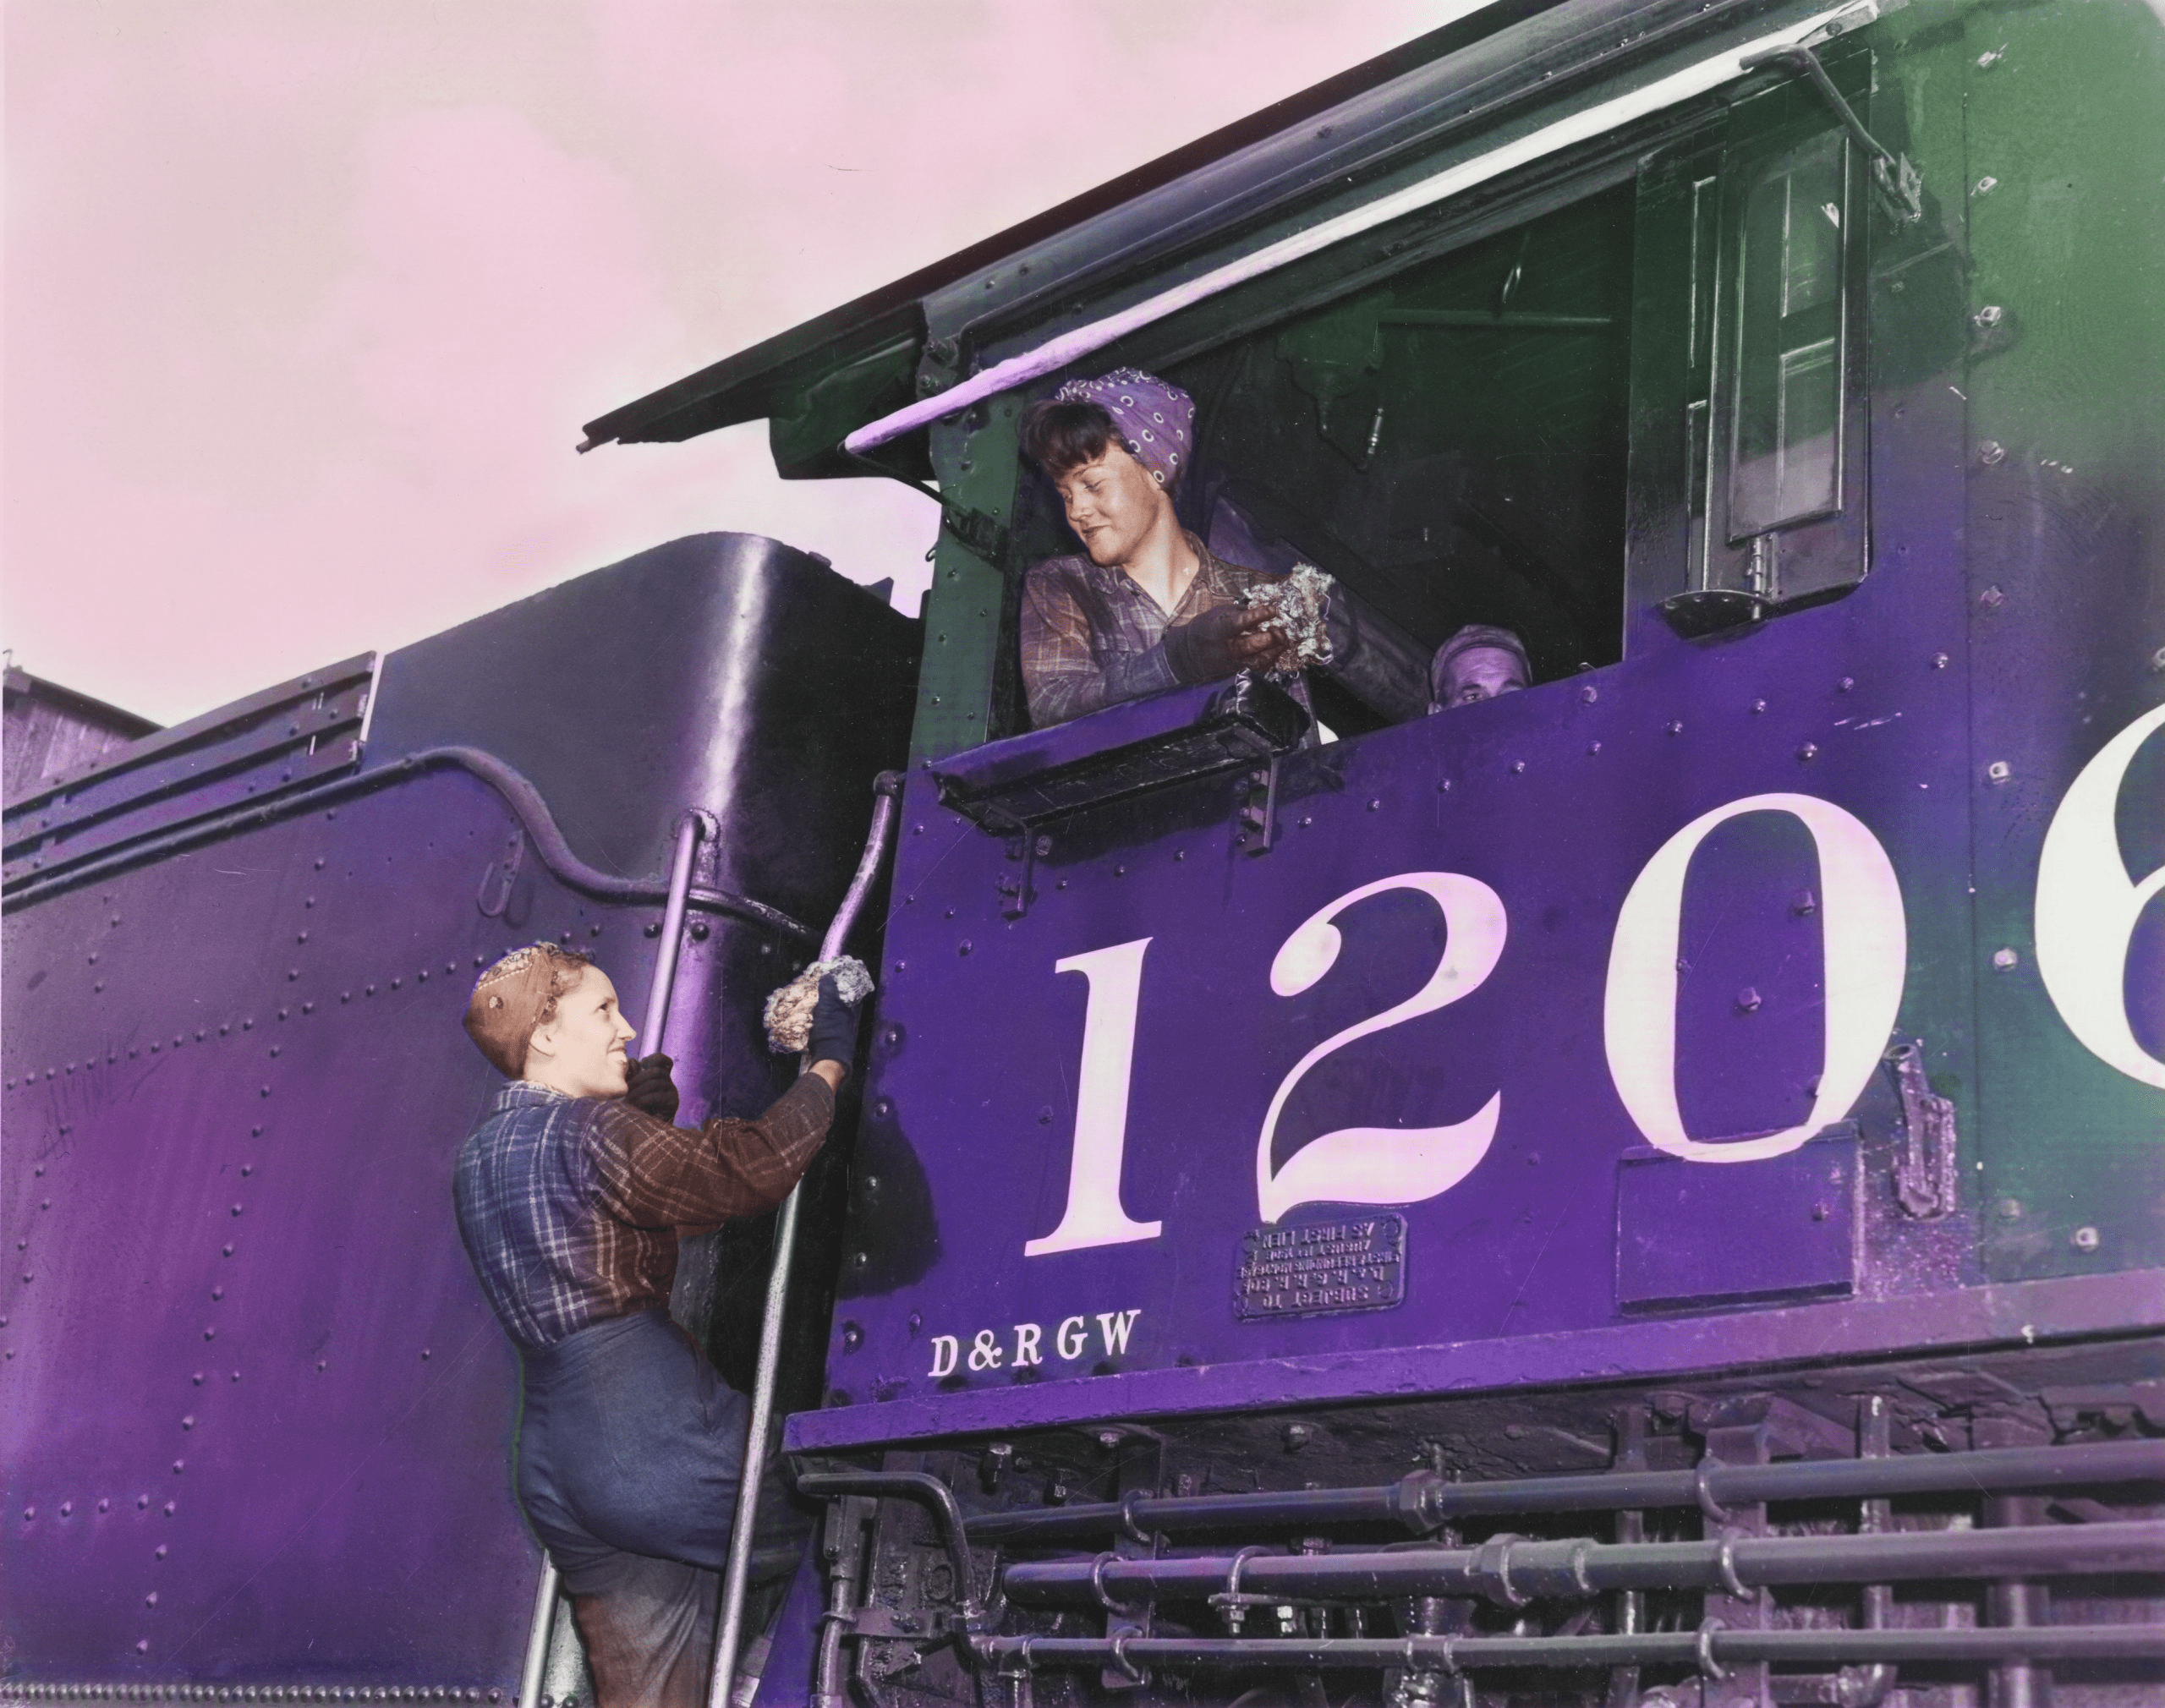 Two women, working on a train in 1944, during World War 2.